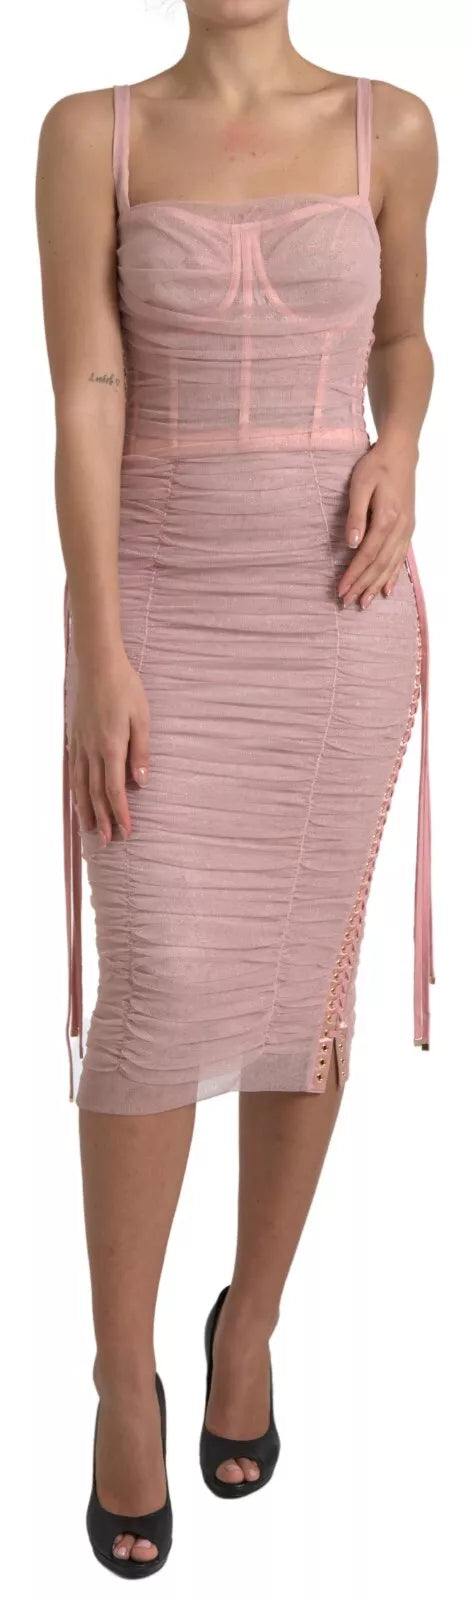 Dolce & Gabbana Pink Bustier Corset Lace Up Bodycon Dress